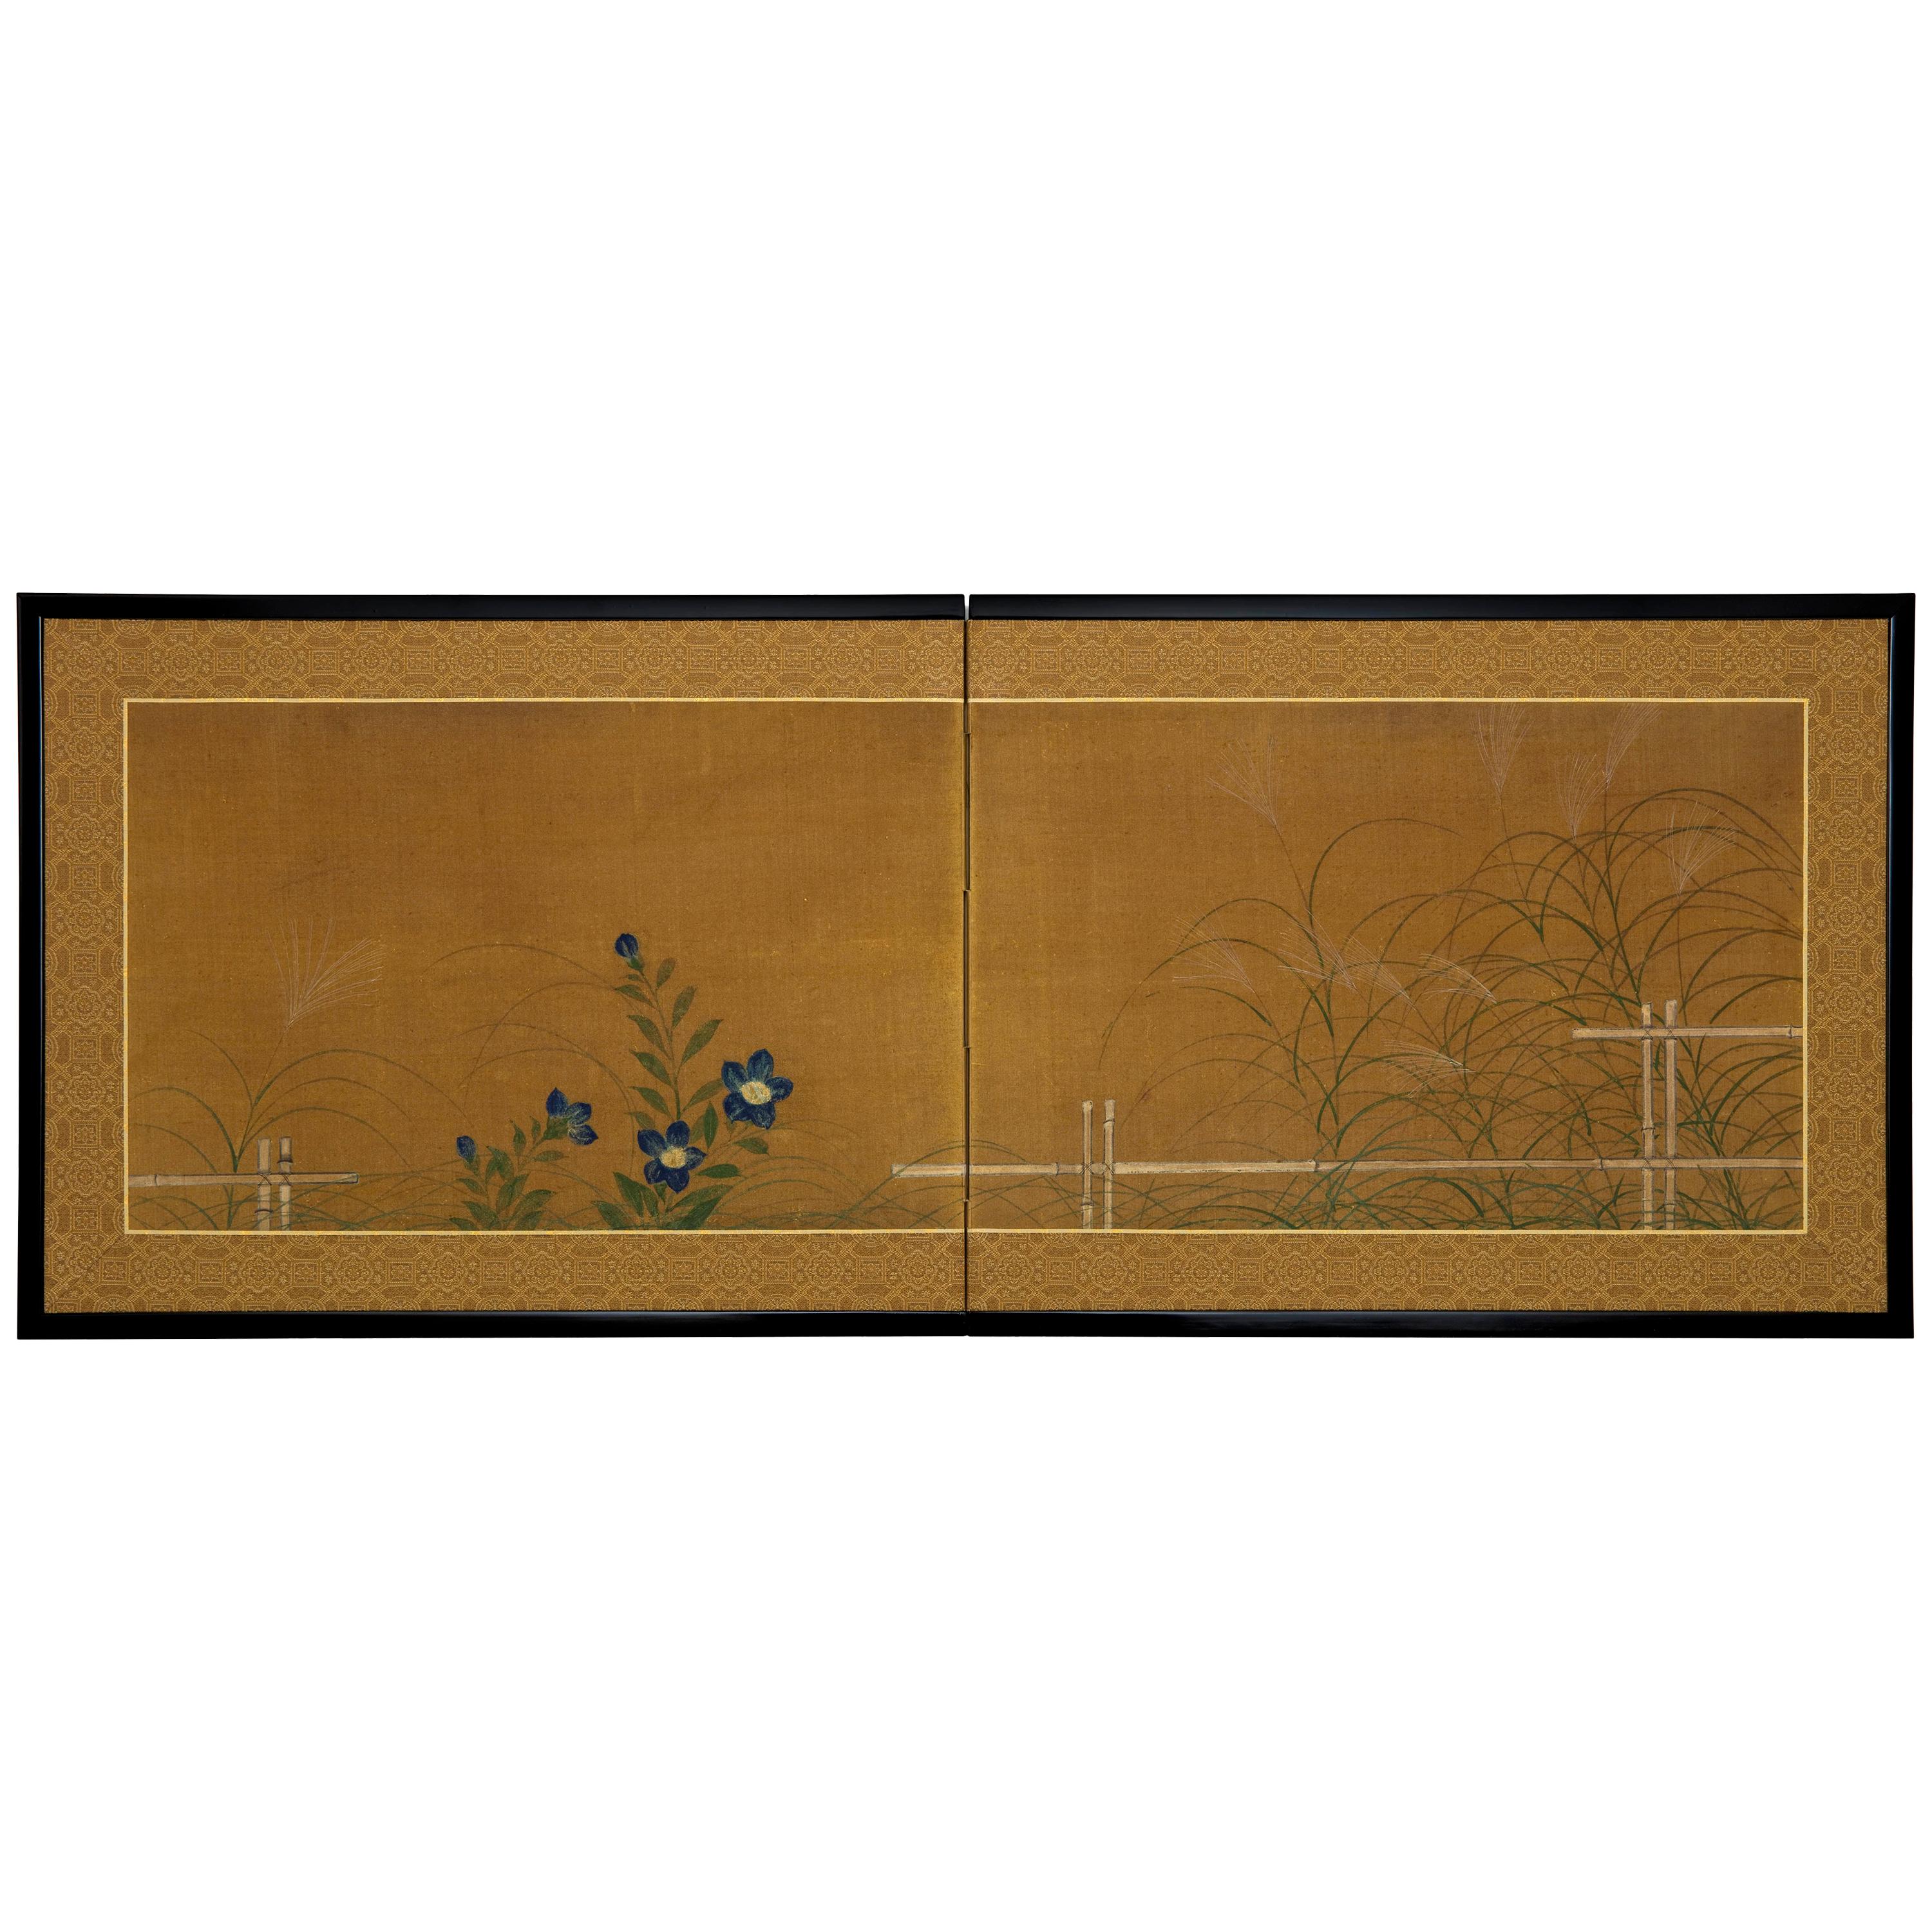 Two-Panel Screen, Fall Grasses and Flowers by Bamboo Fence For Sale